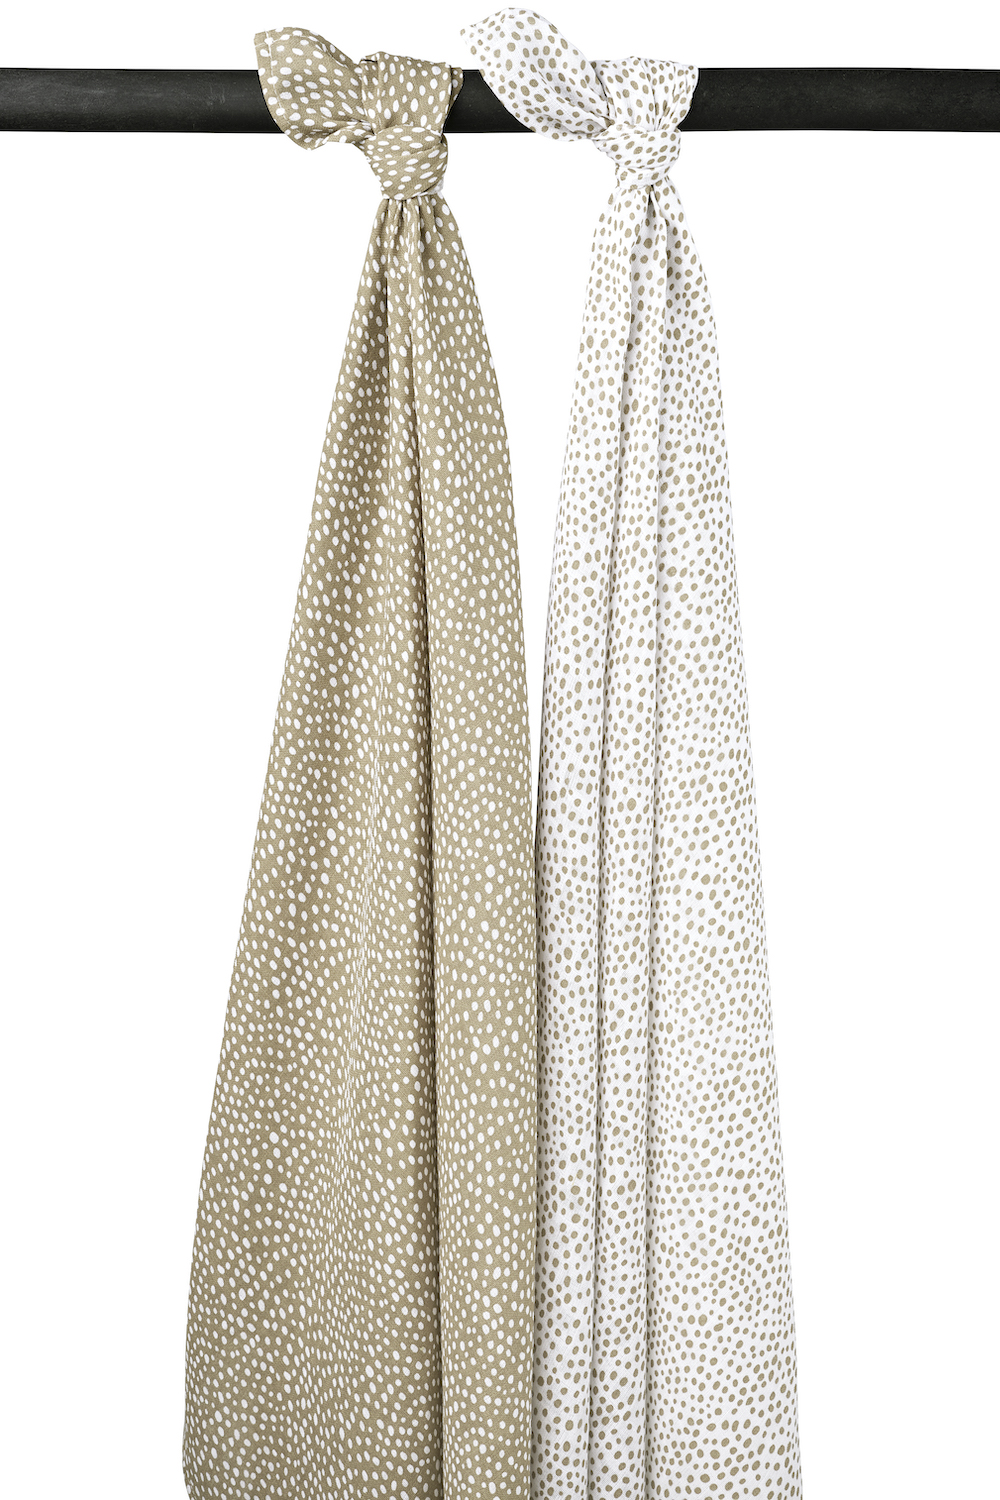 Swaddle  2er pack musselin Cheetah - taupe - 120x120cm